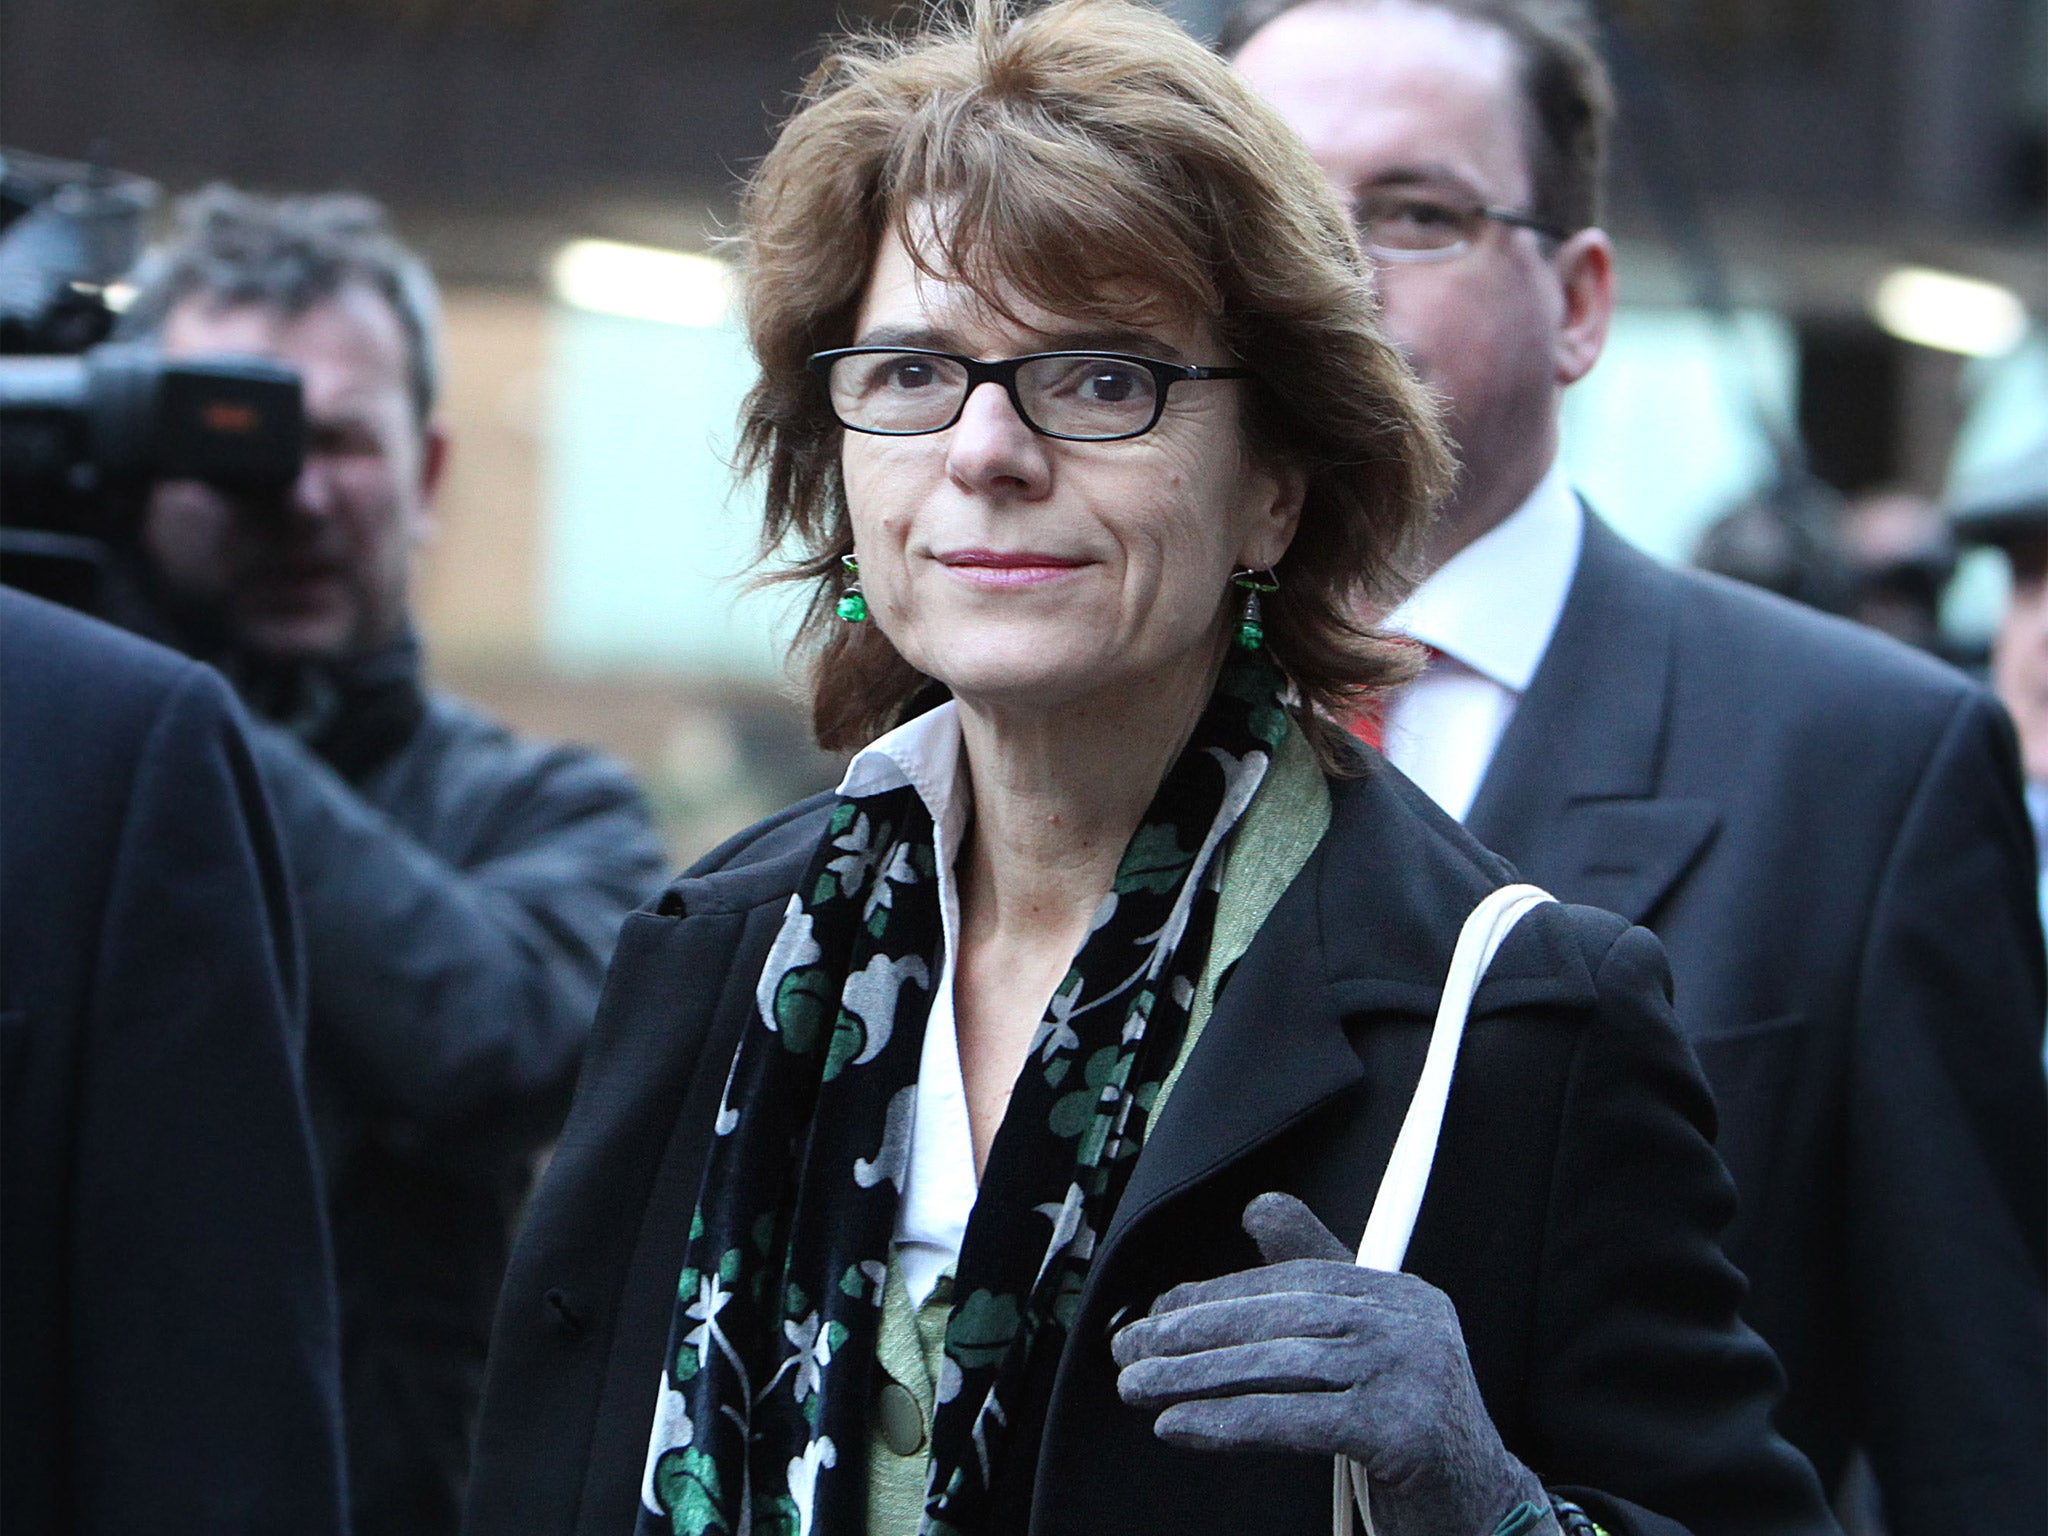 Vicky Pryce leaving Southwark Crown Court